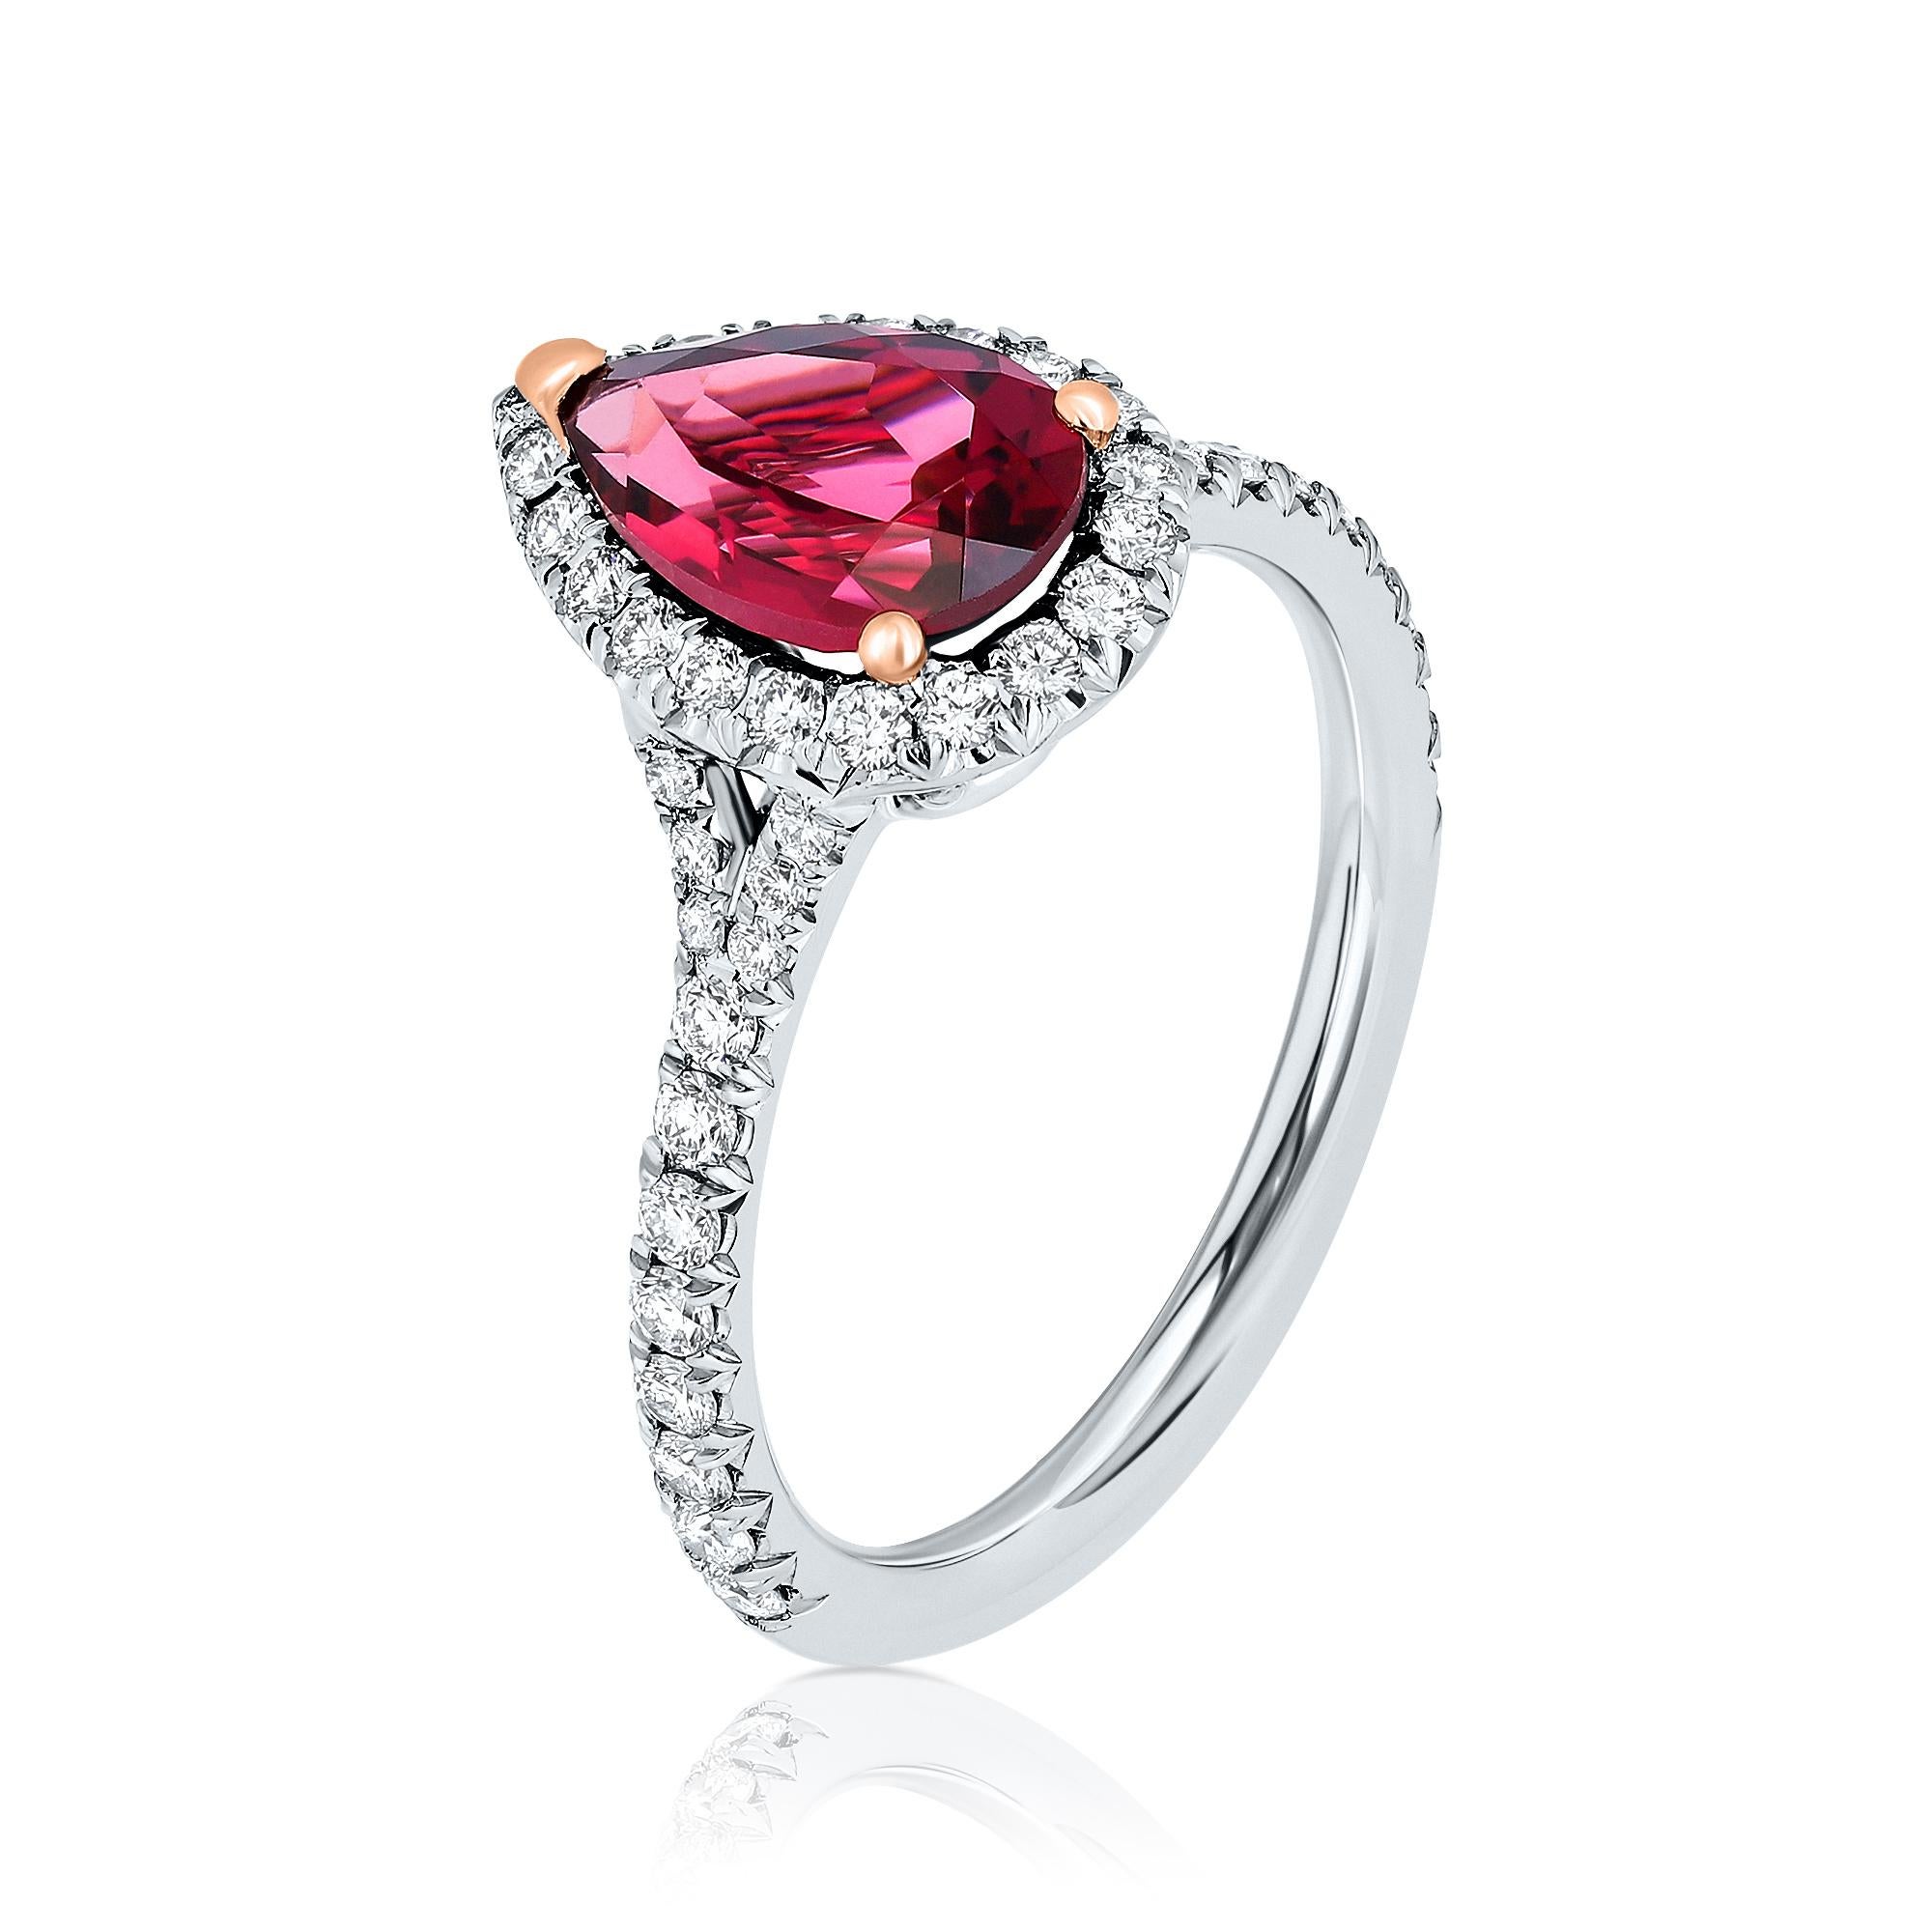 A stunning cocktail ring featuring a 1.86-carat pear-shaped Red Tourmaline (Rubellite) as its breathtaking centerpiece. Surrounding the vibrant center stone are sparkling round brilliant Diamonds, creating a halo effect that enhances its beauty.